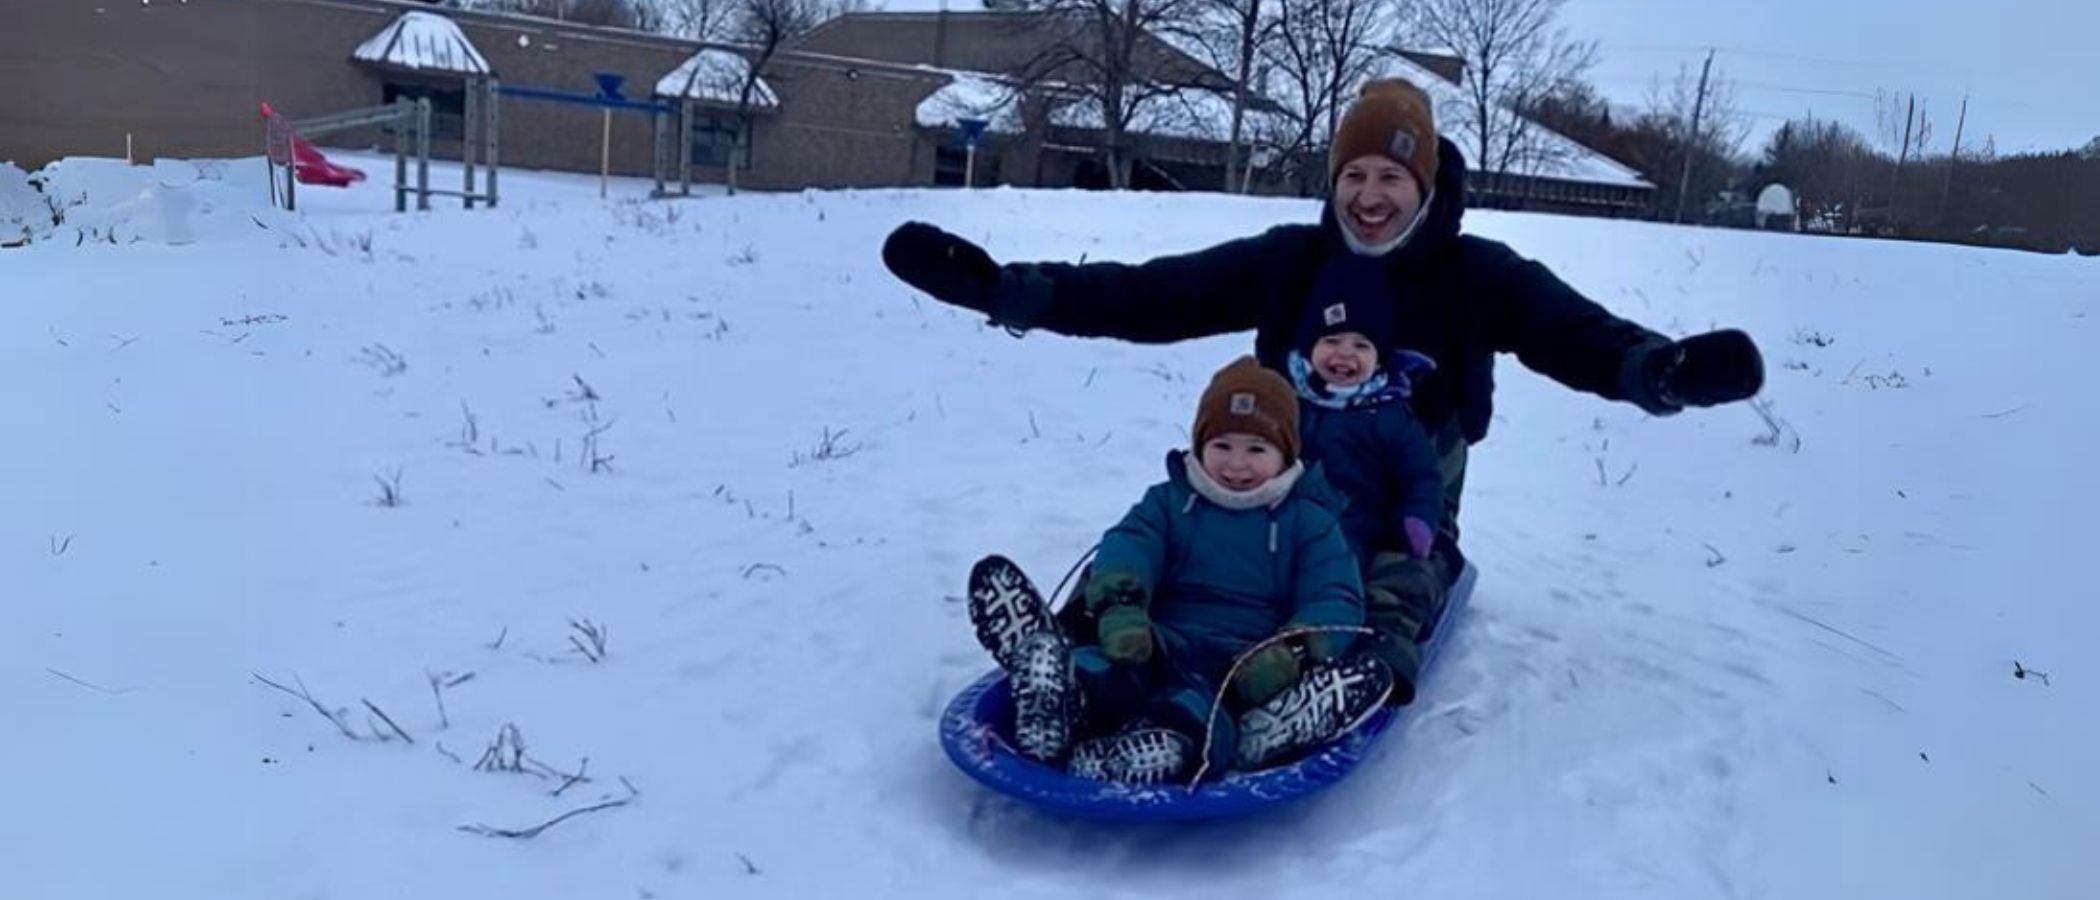 An adult and two children smiling as they ride a sled together down a snowy hill.